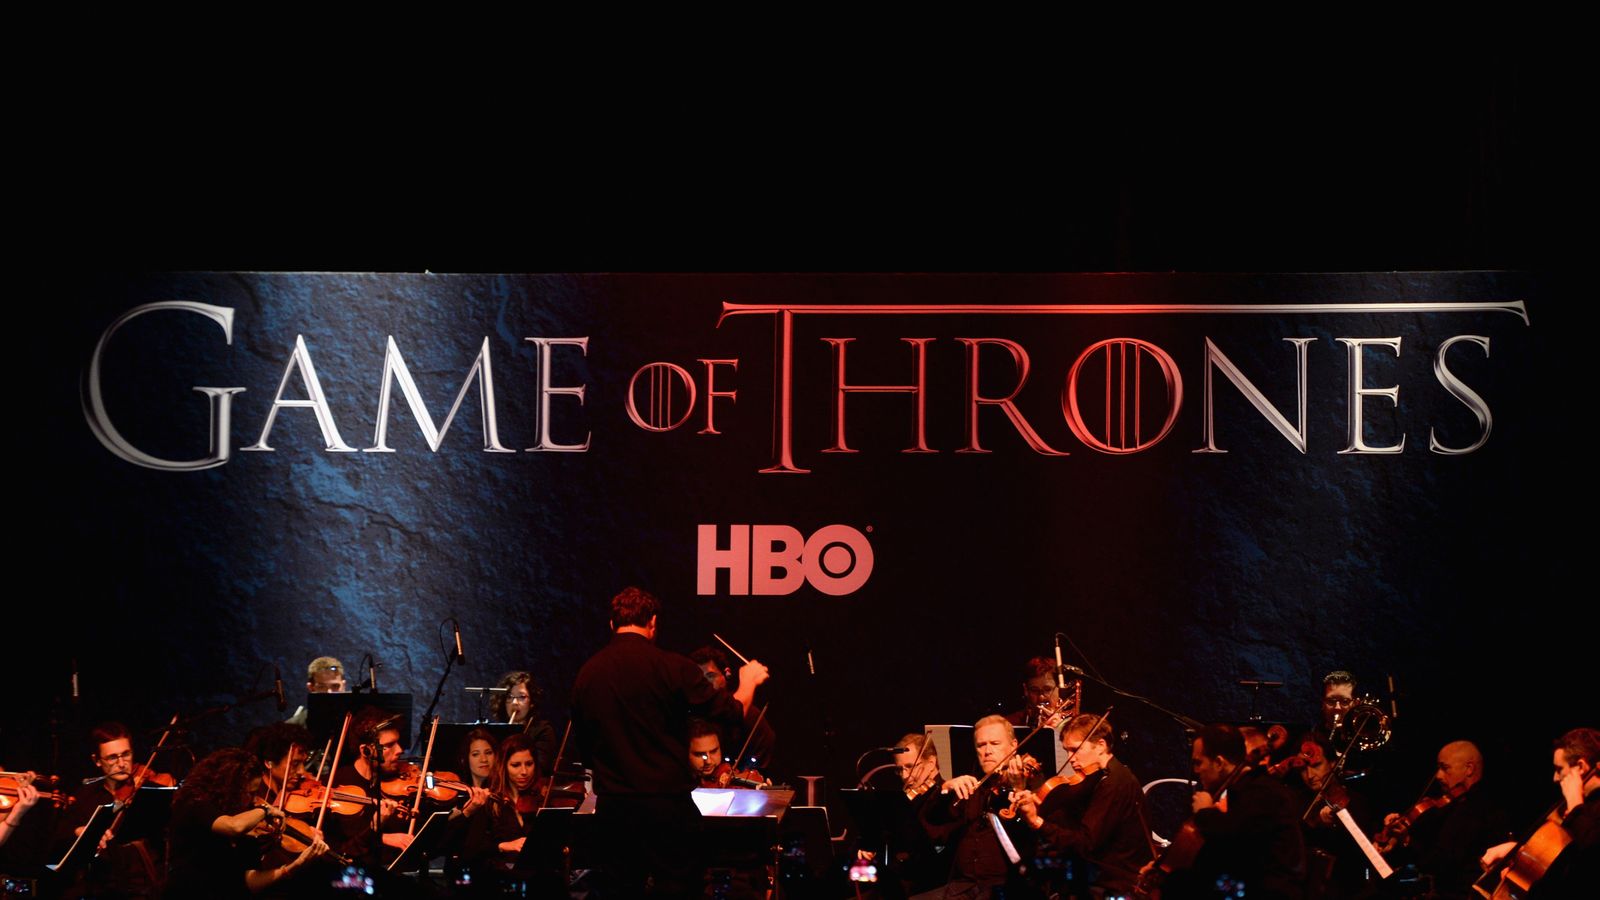 Game Of Thrones Live Concert Tour Announced Ents & Arts News Sky News